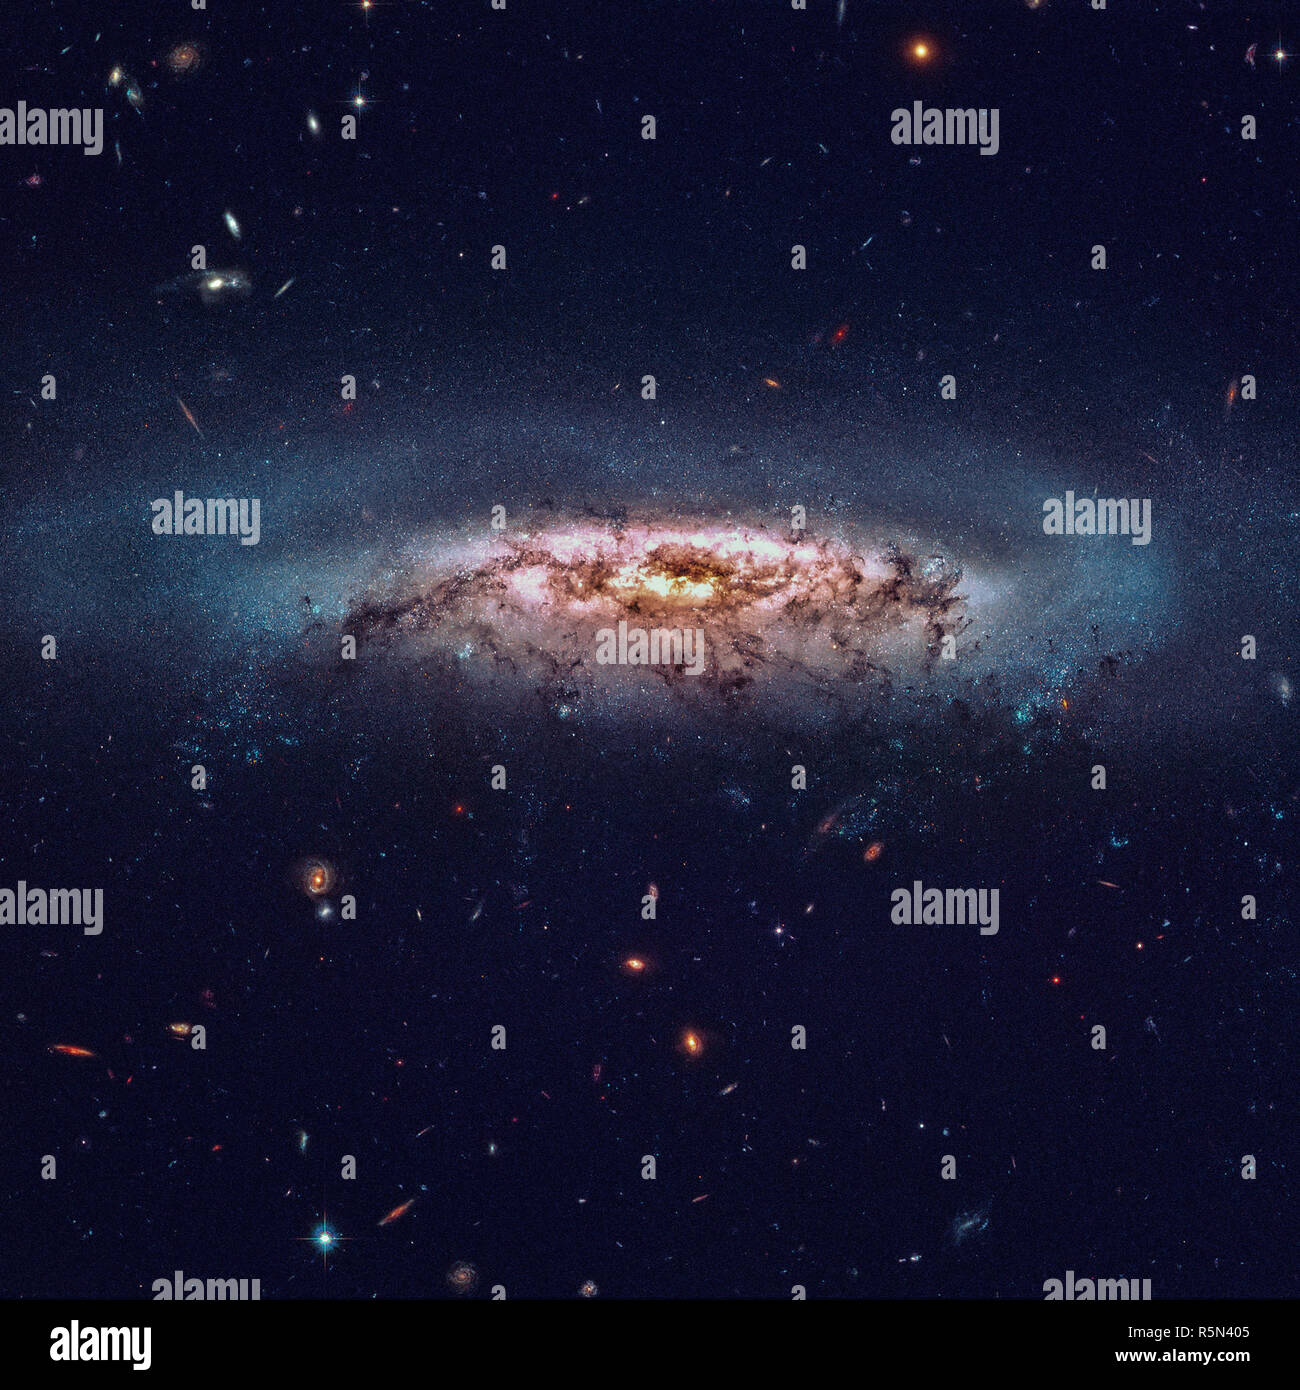 Page 2 Spiral Barred Galaxy High Resolution Stock Photography And Images Alamy